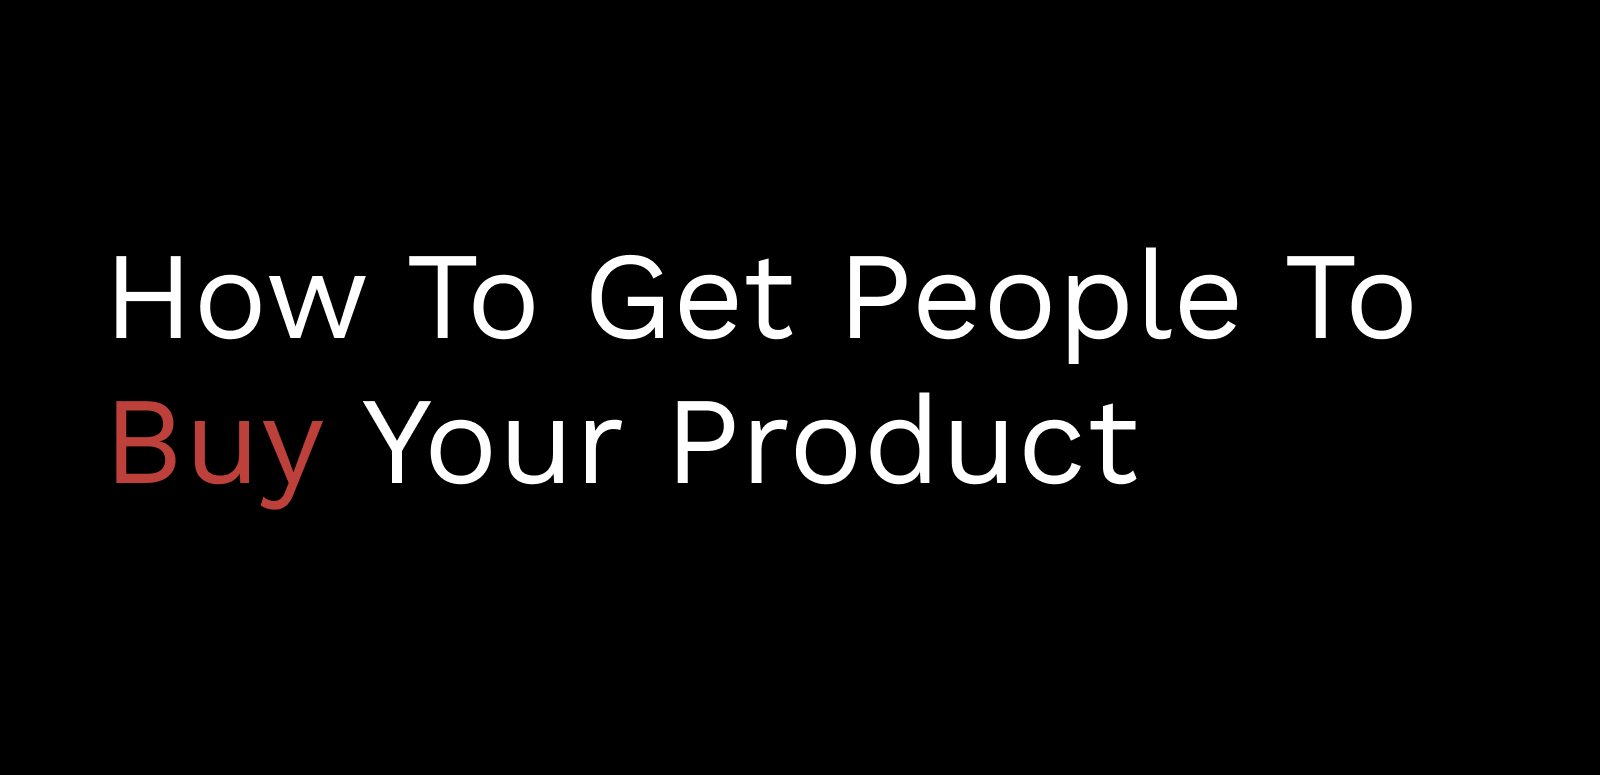 How To Get People To Buy Your Product